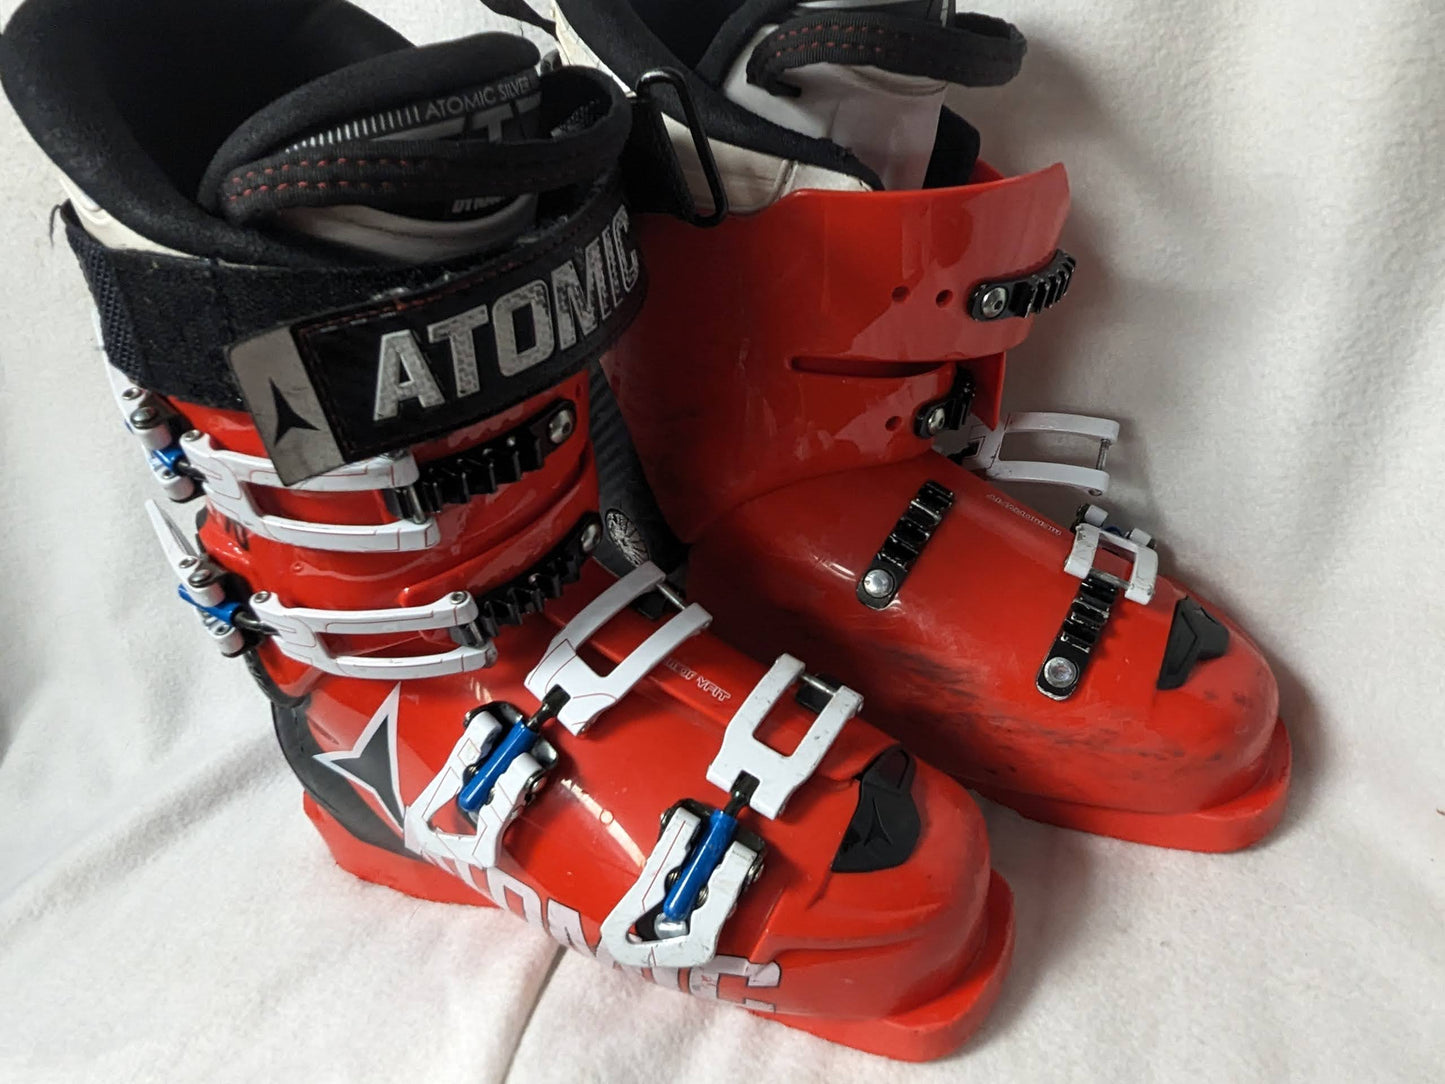 Atomic Redstar FIS 70 Ski Boots Size 25.5 Color Red Condition Used